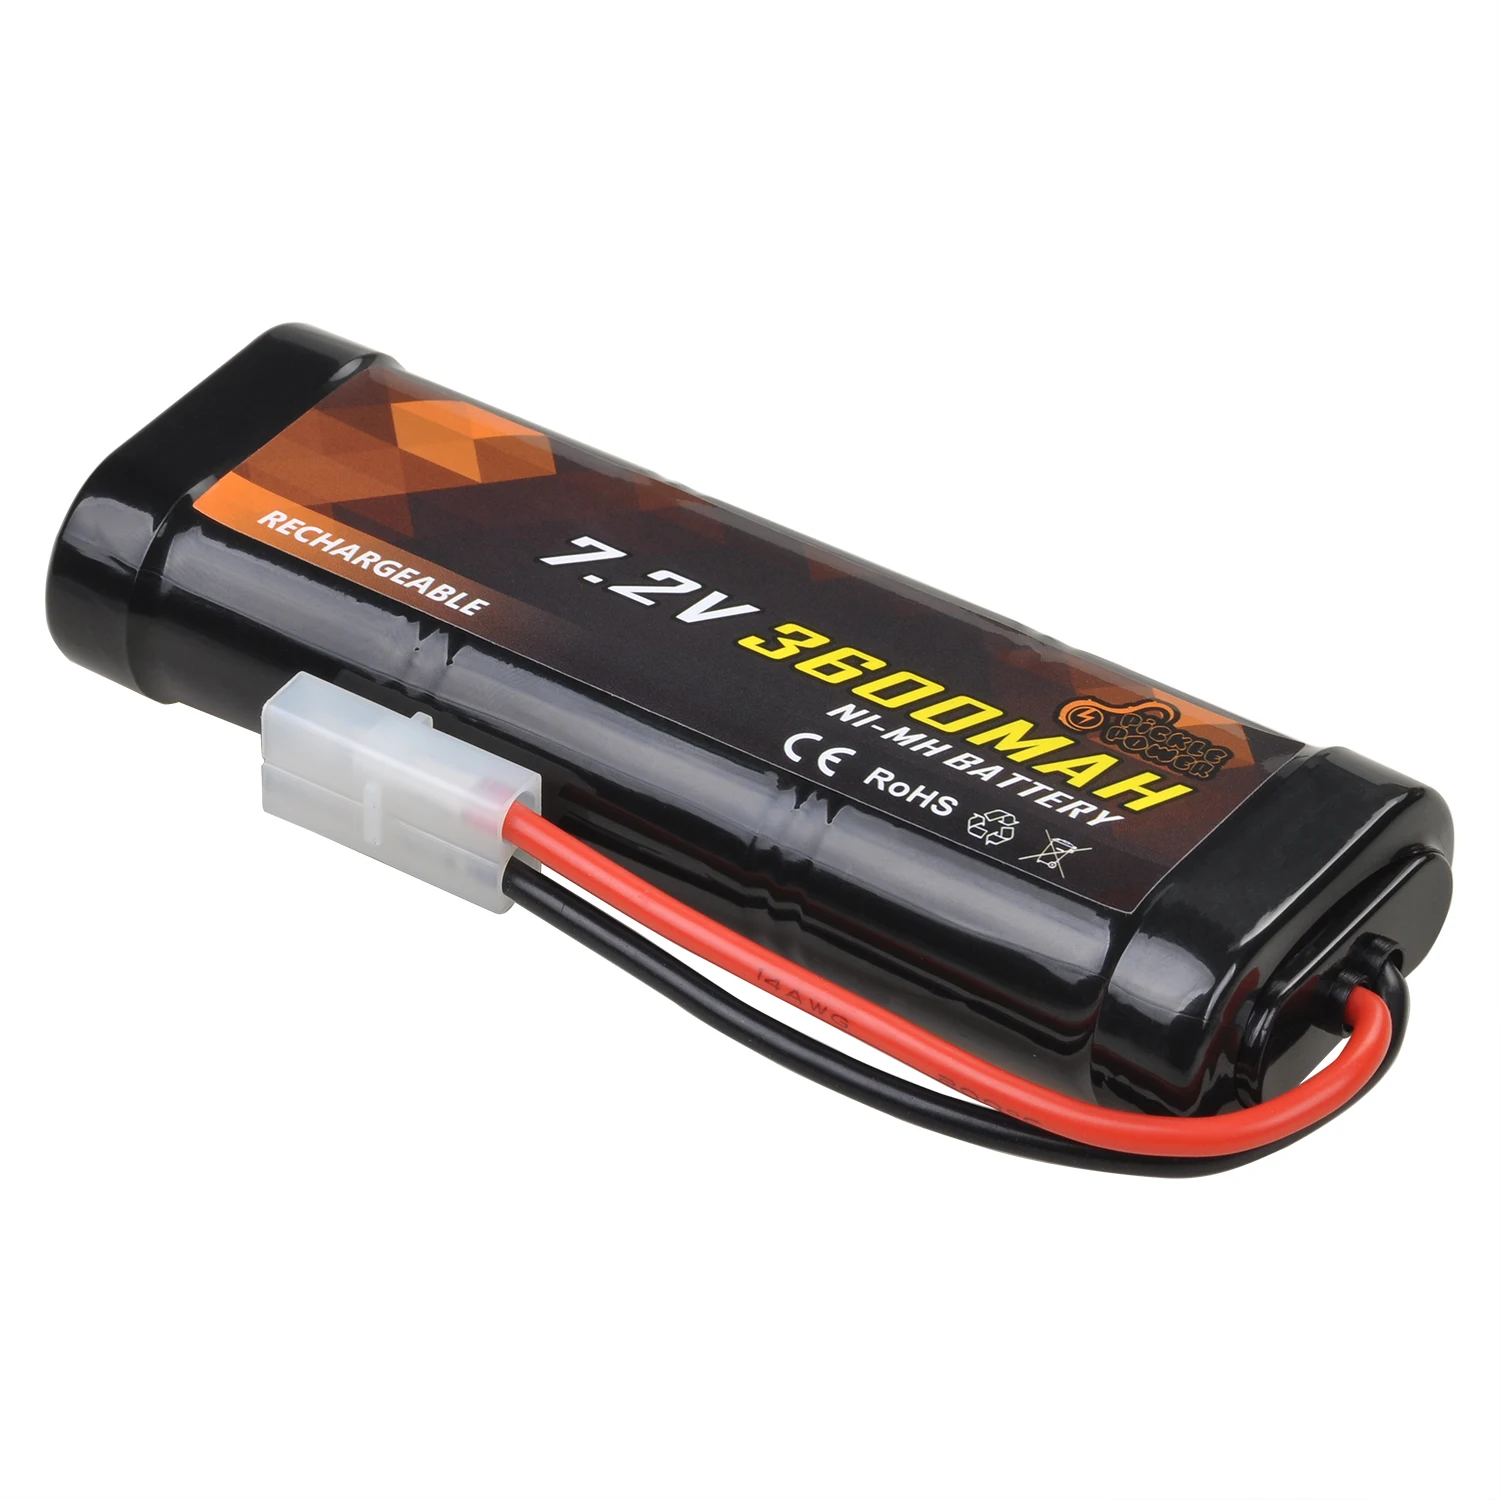 

2 Pcs RC Car Battery 7.2V 3600mAh NiMH Replacement RC Battery with Tamiya Connector for RC Cars Truck Airplane Helicopter Boat.